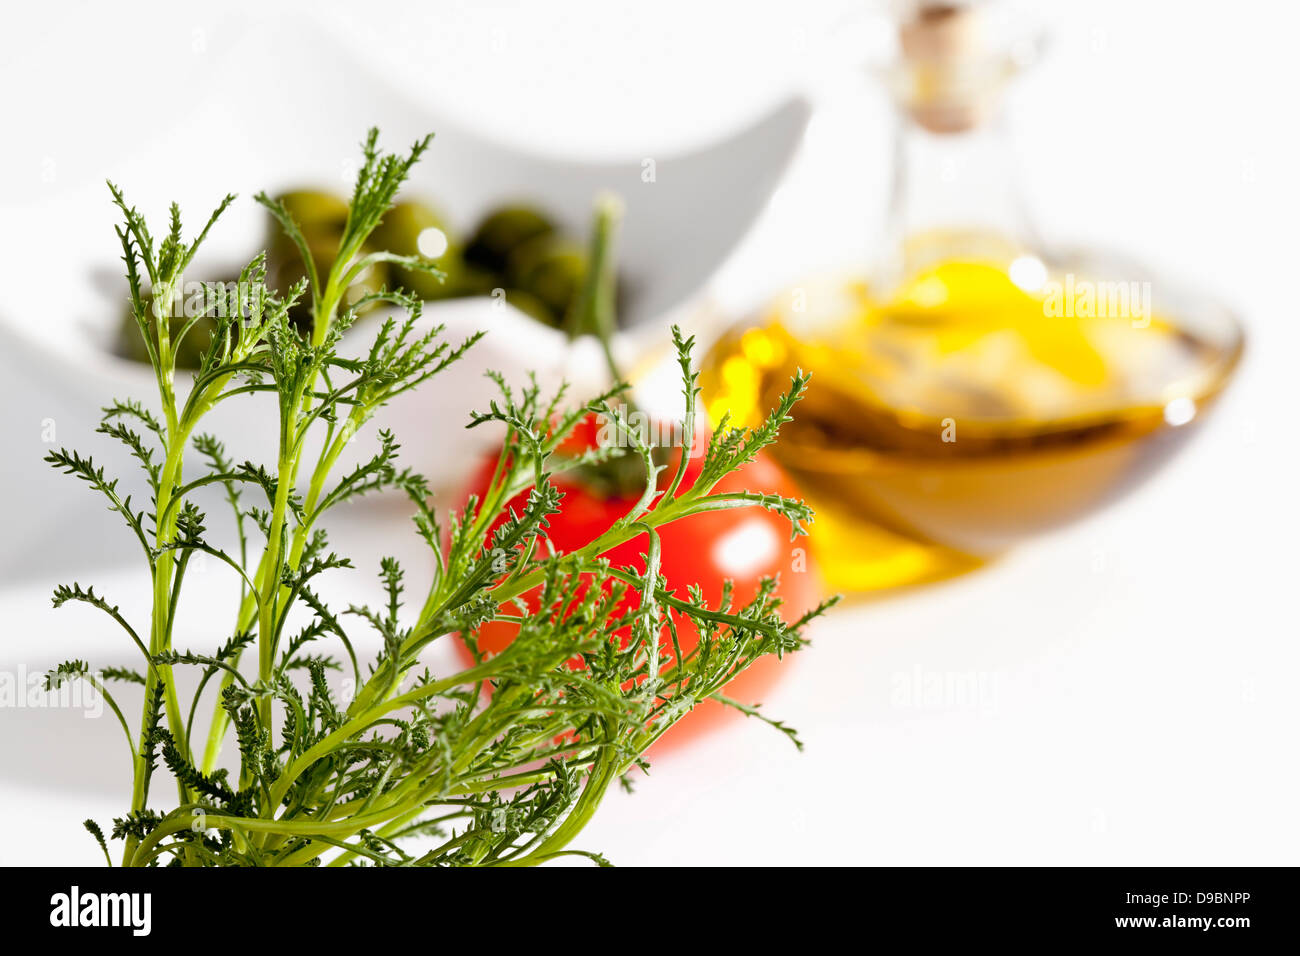 Olive herb with tomato, olives and olive oil on white background, close up Stock Photo